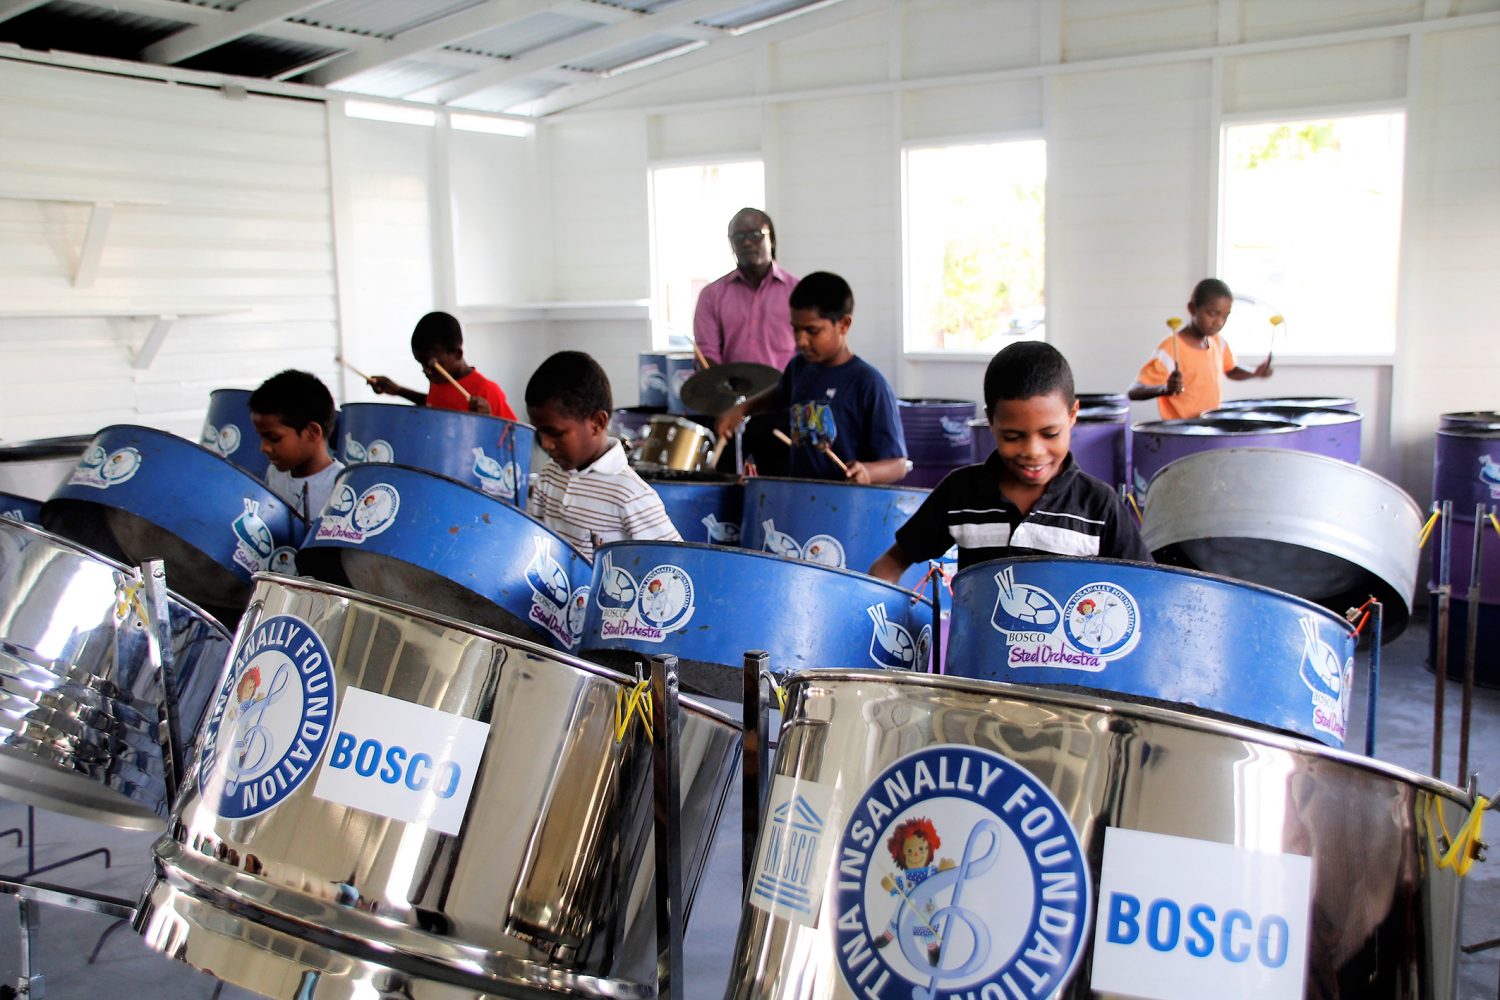 Members of the St. John Bosco Steel Orchestra showcasing their talent on the pans (Ministry of Education photo)